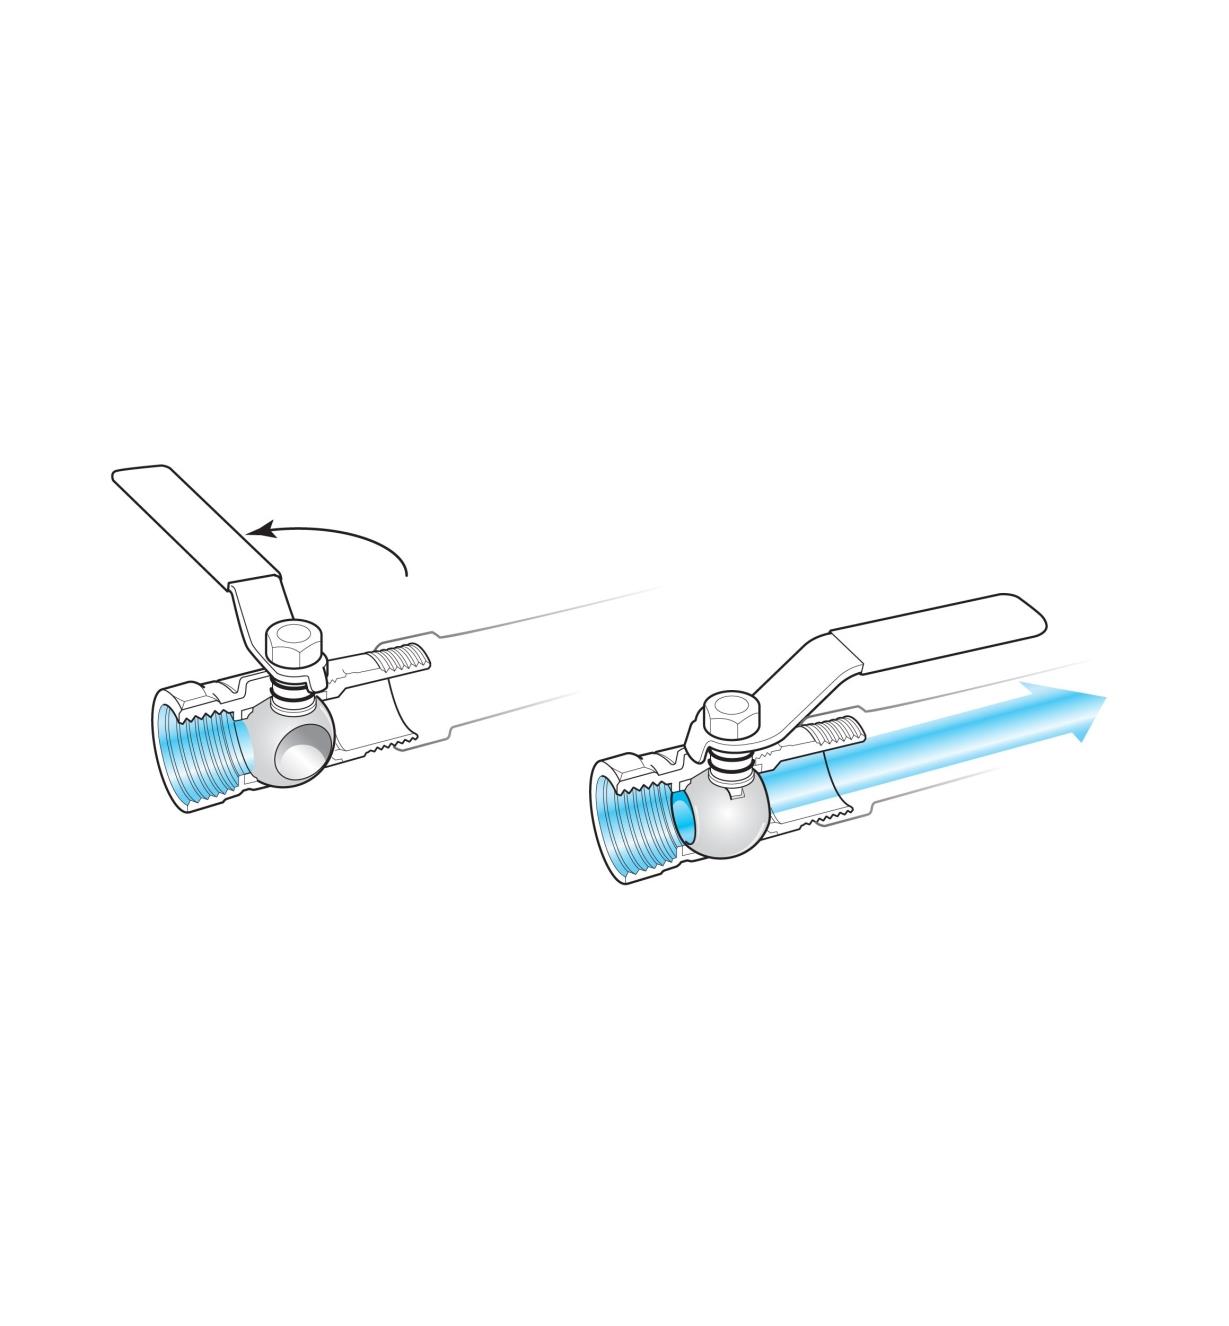 Illustration shows how turning the handle opens or closes the valve by rotating the cross-drilled ball inside